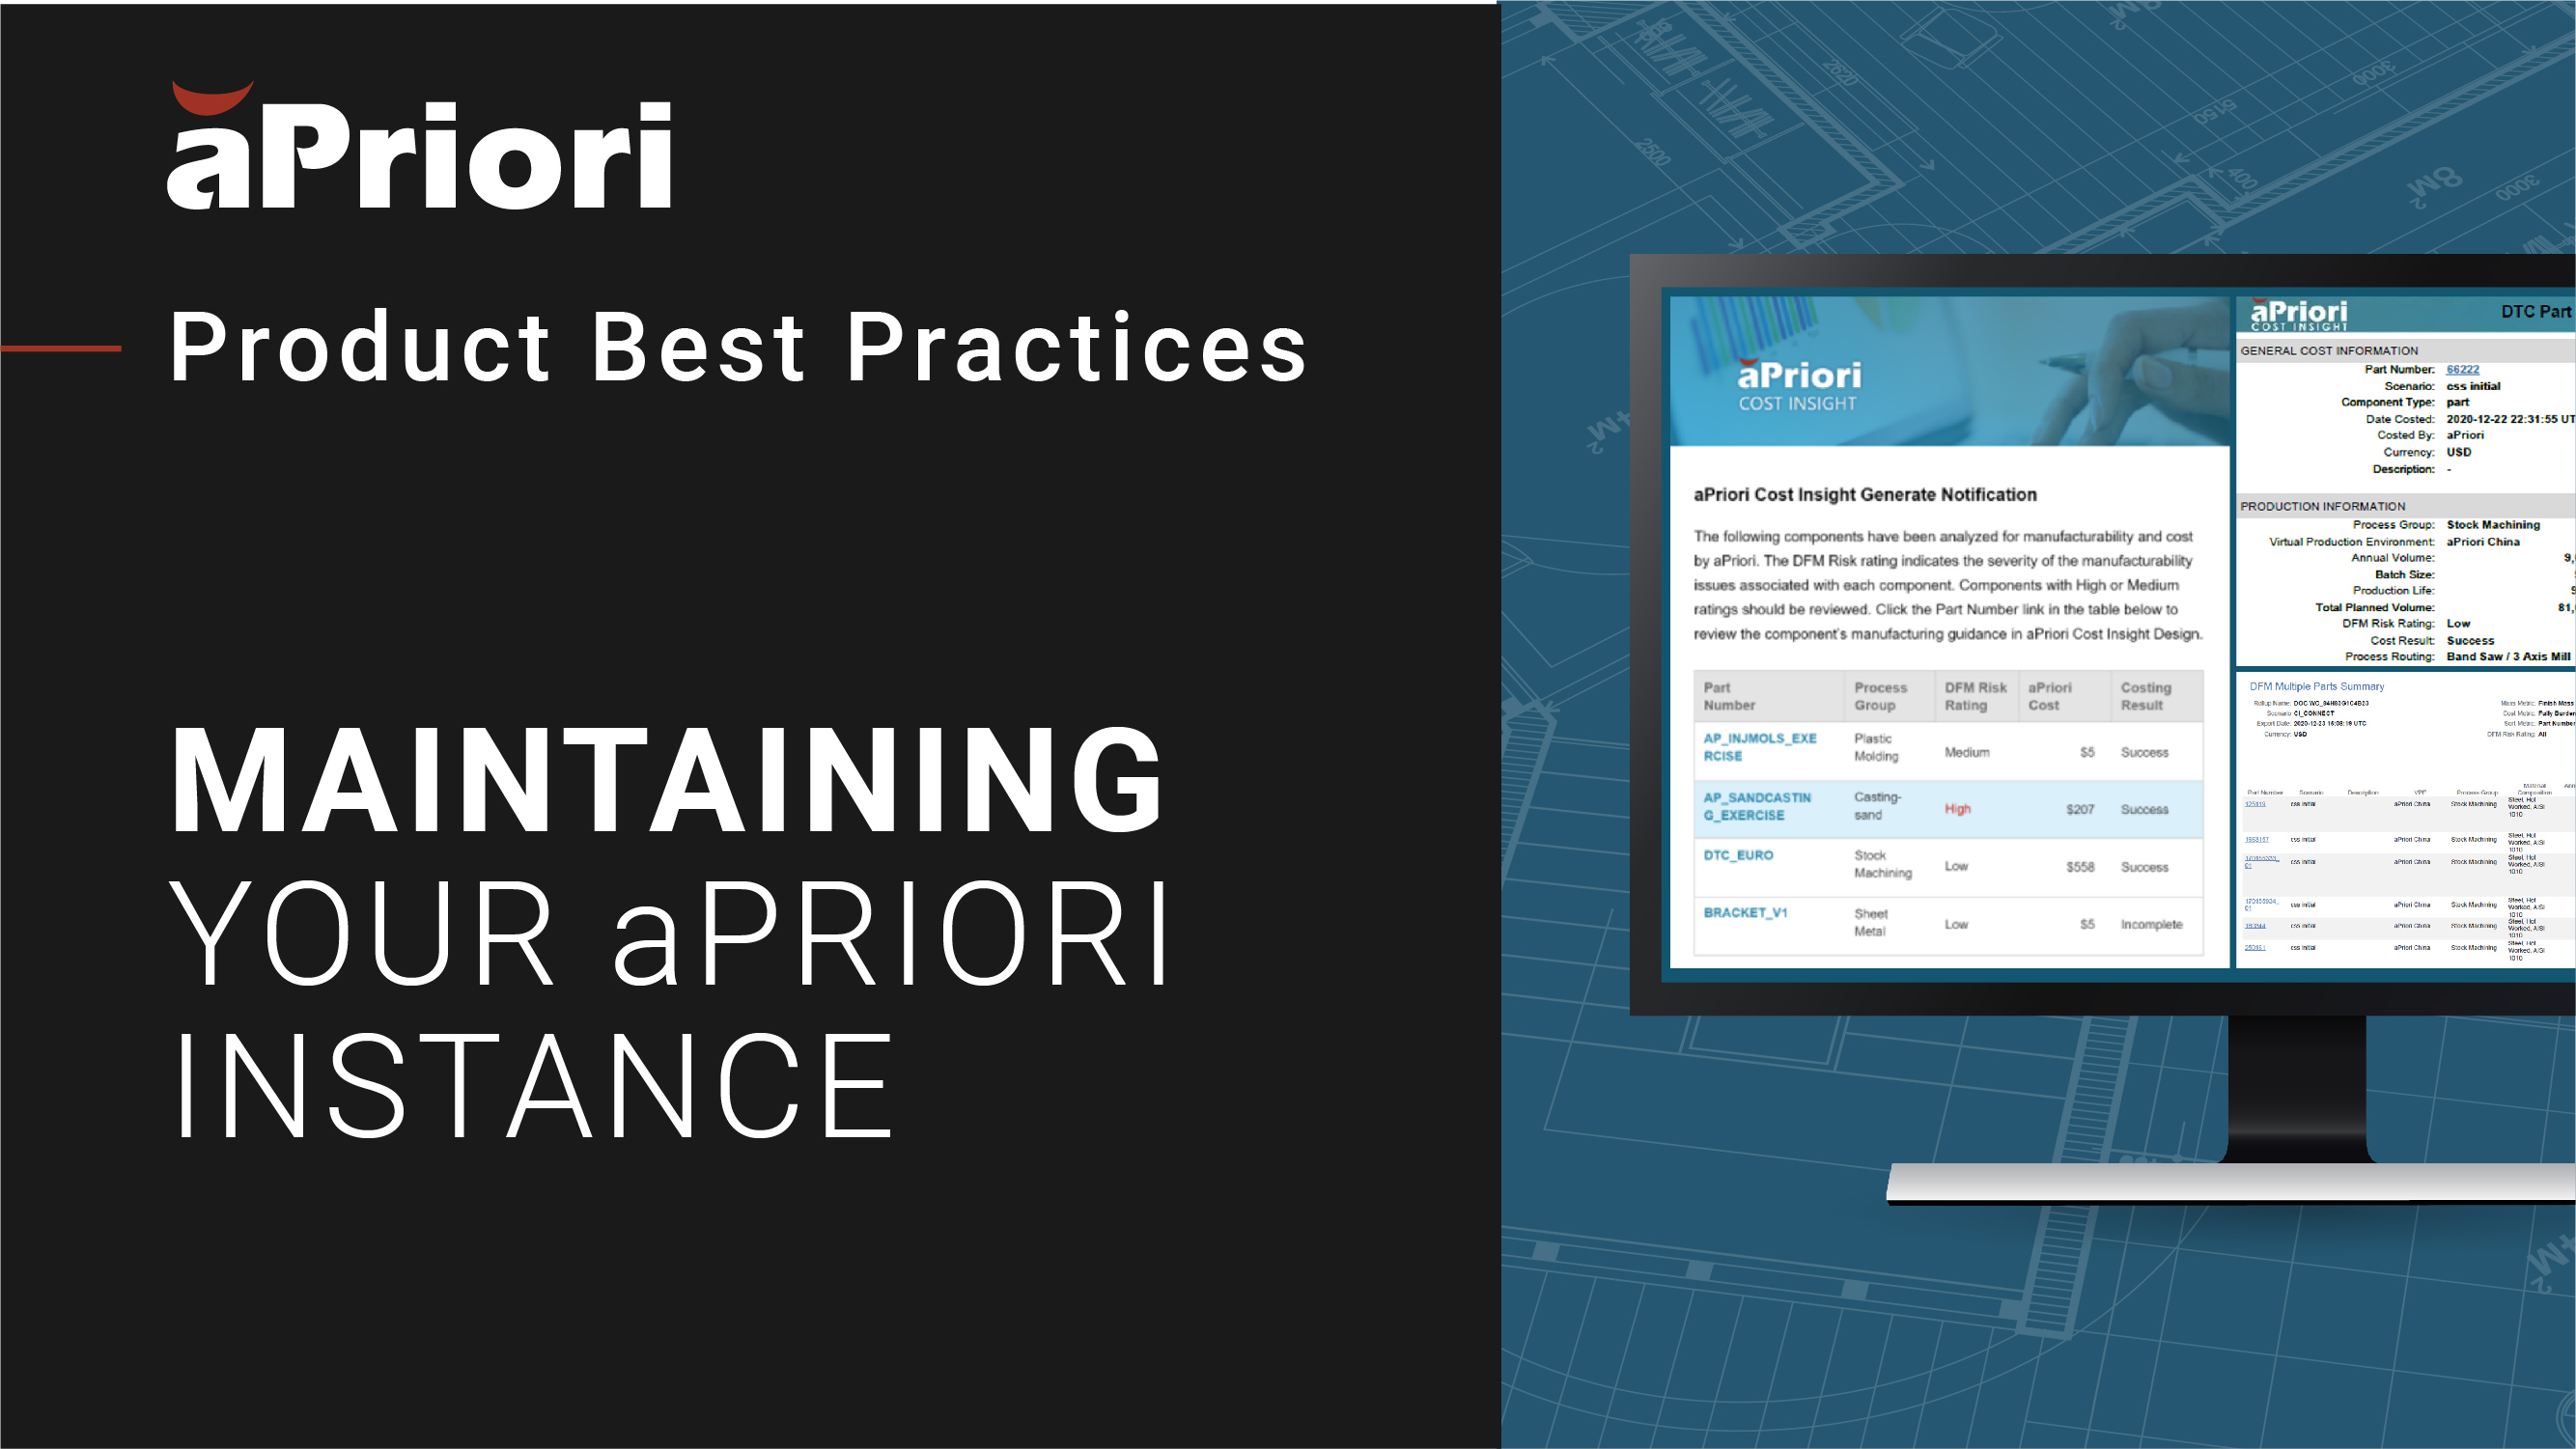 Keeping Your aPriori Up-To-Date - Best Practices